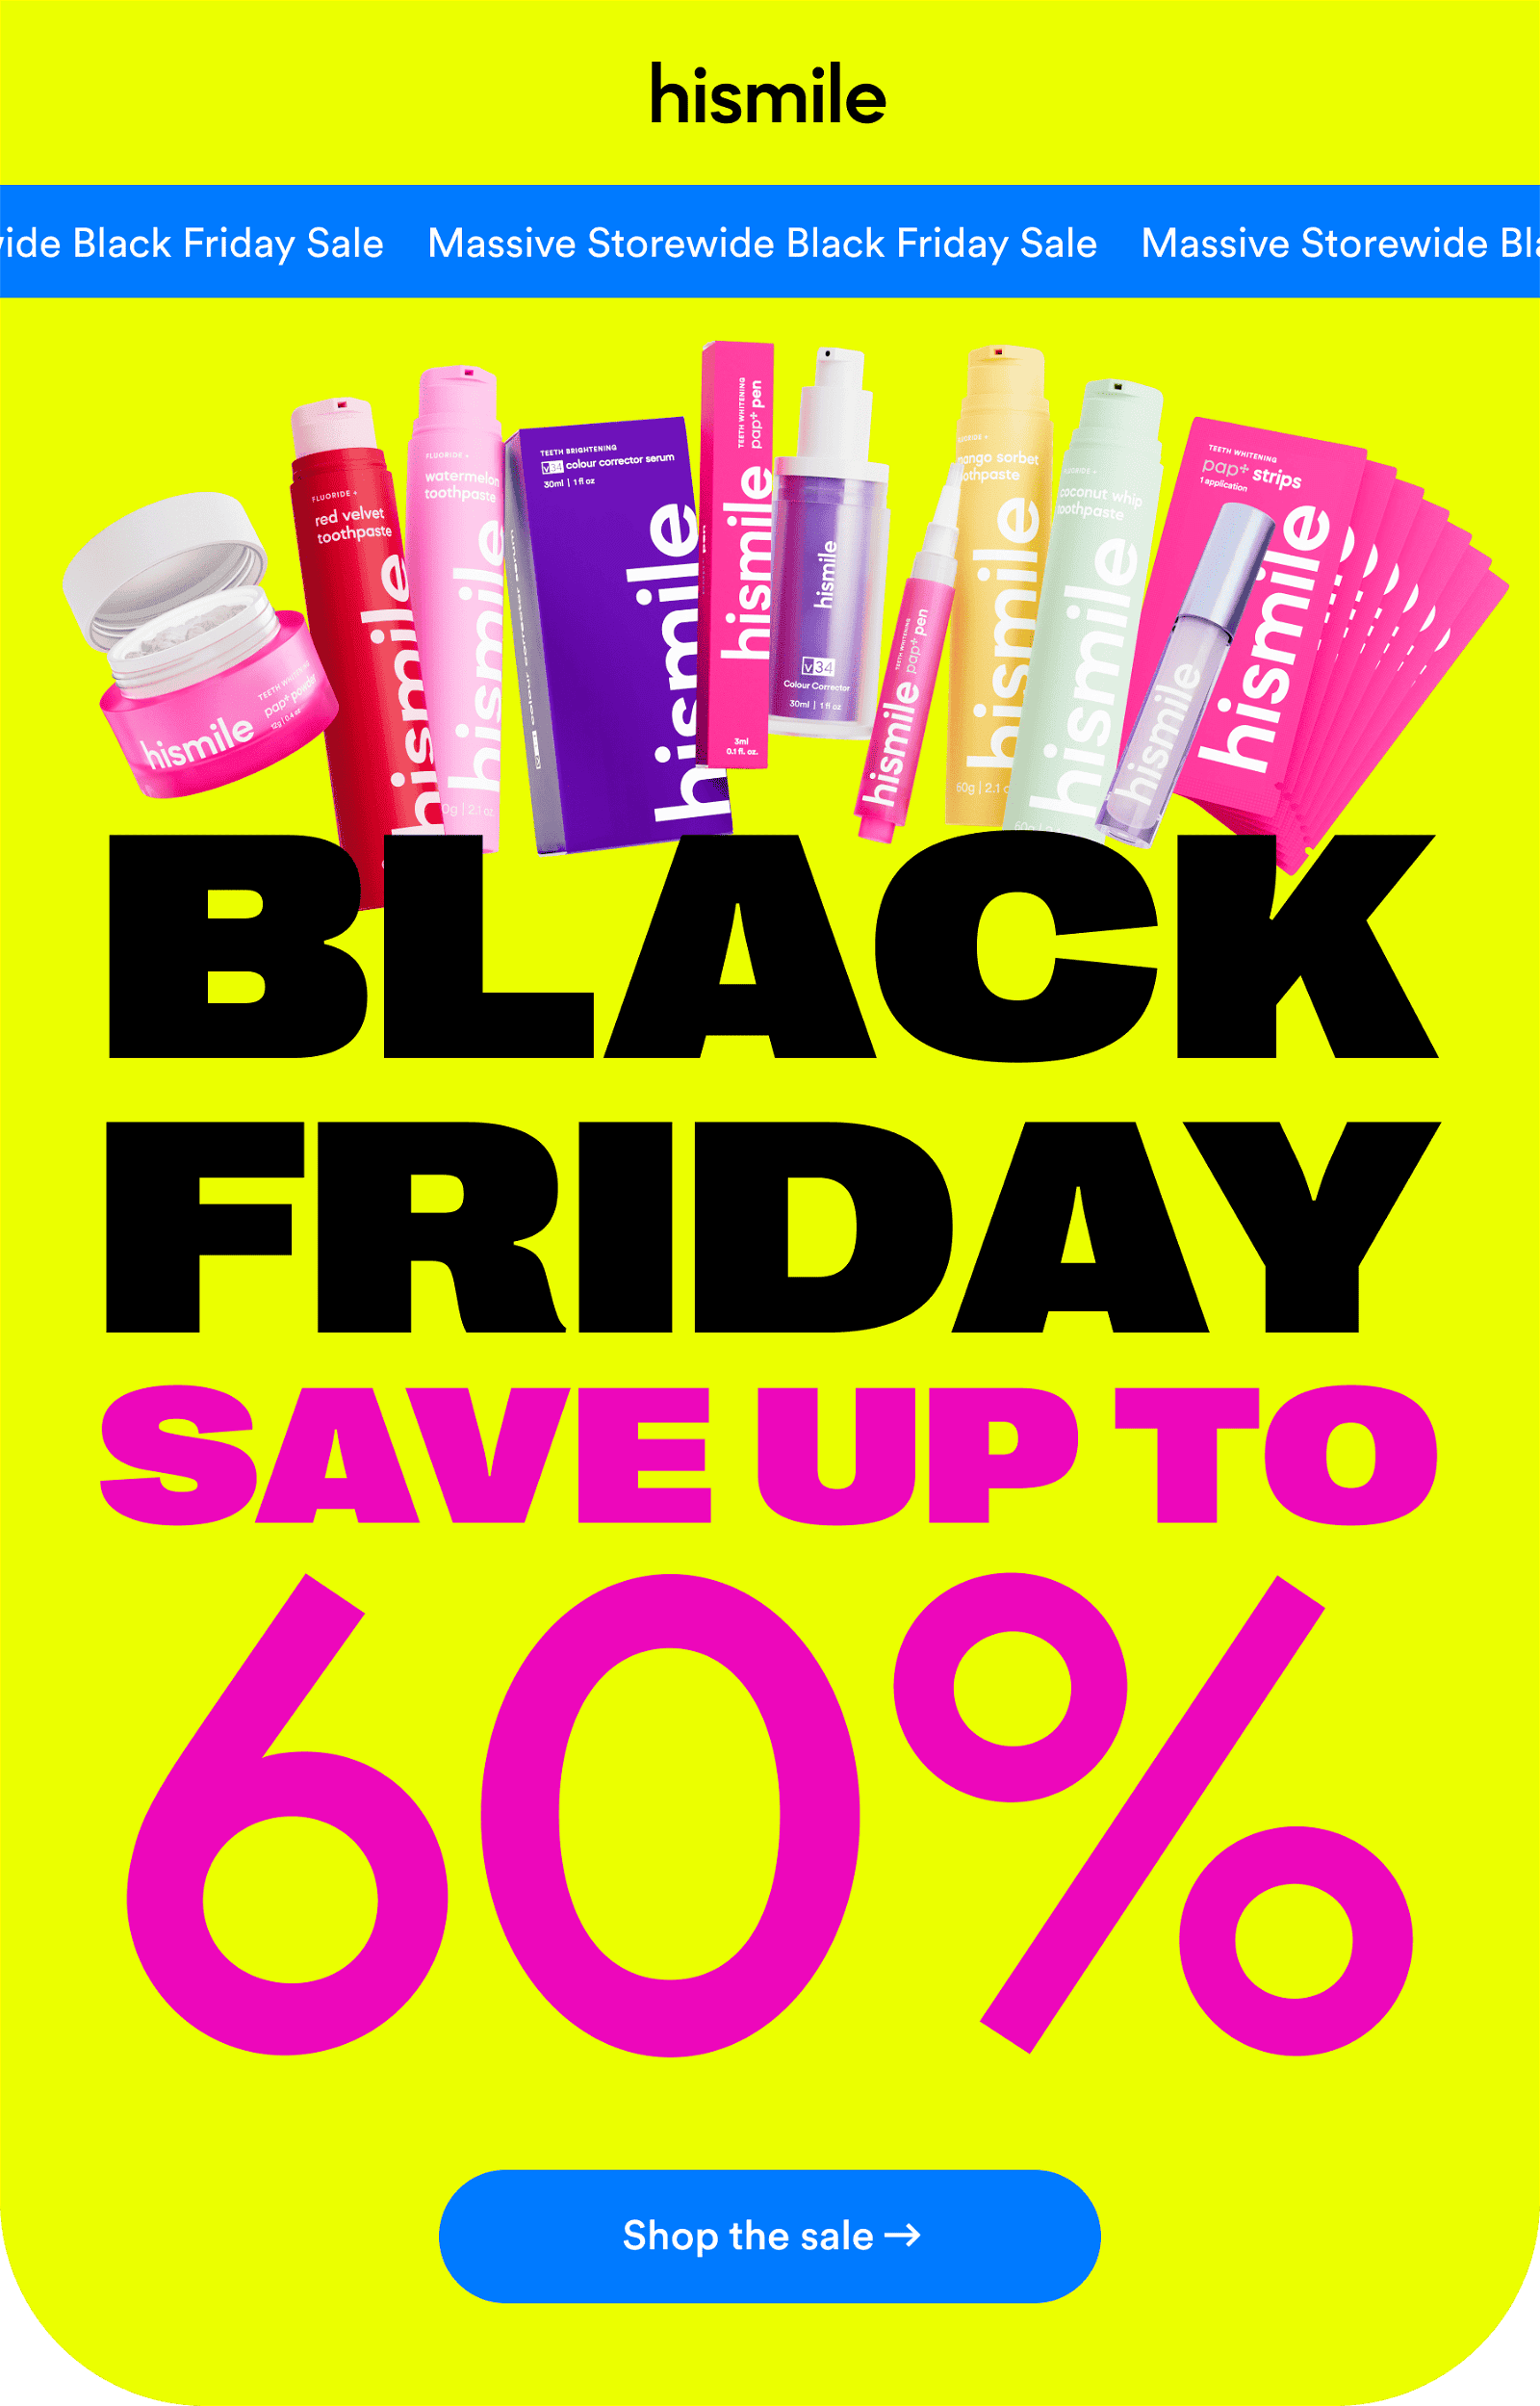 Massive storewide Black Friday sale. Save up to 60%. Lock in savings!